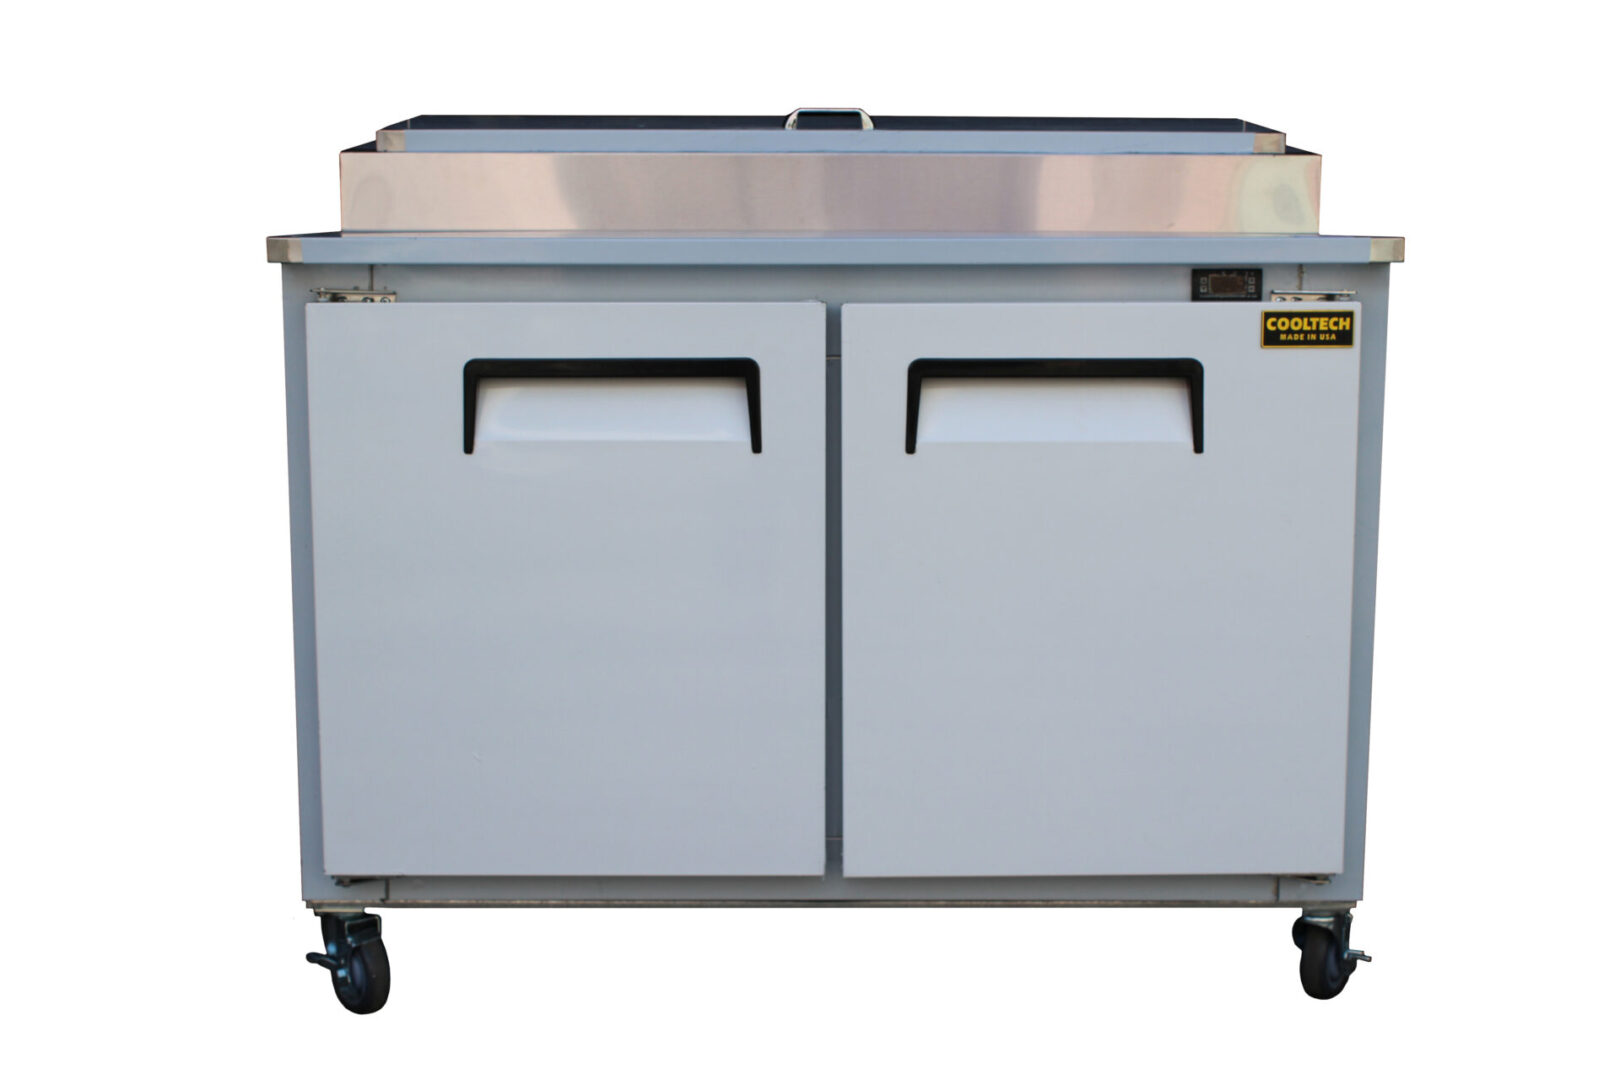 Commercial Cooltech 2 Door Refrigerated Pizza Prep Table 48” with two doors on wheels, isolated on a white background.